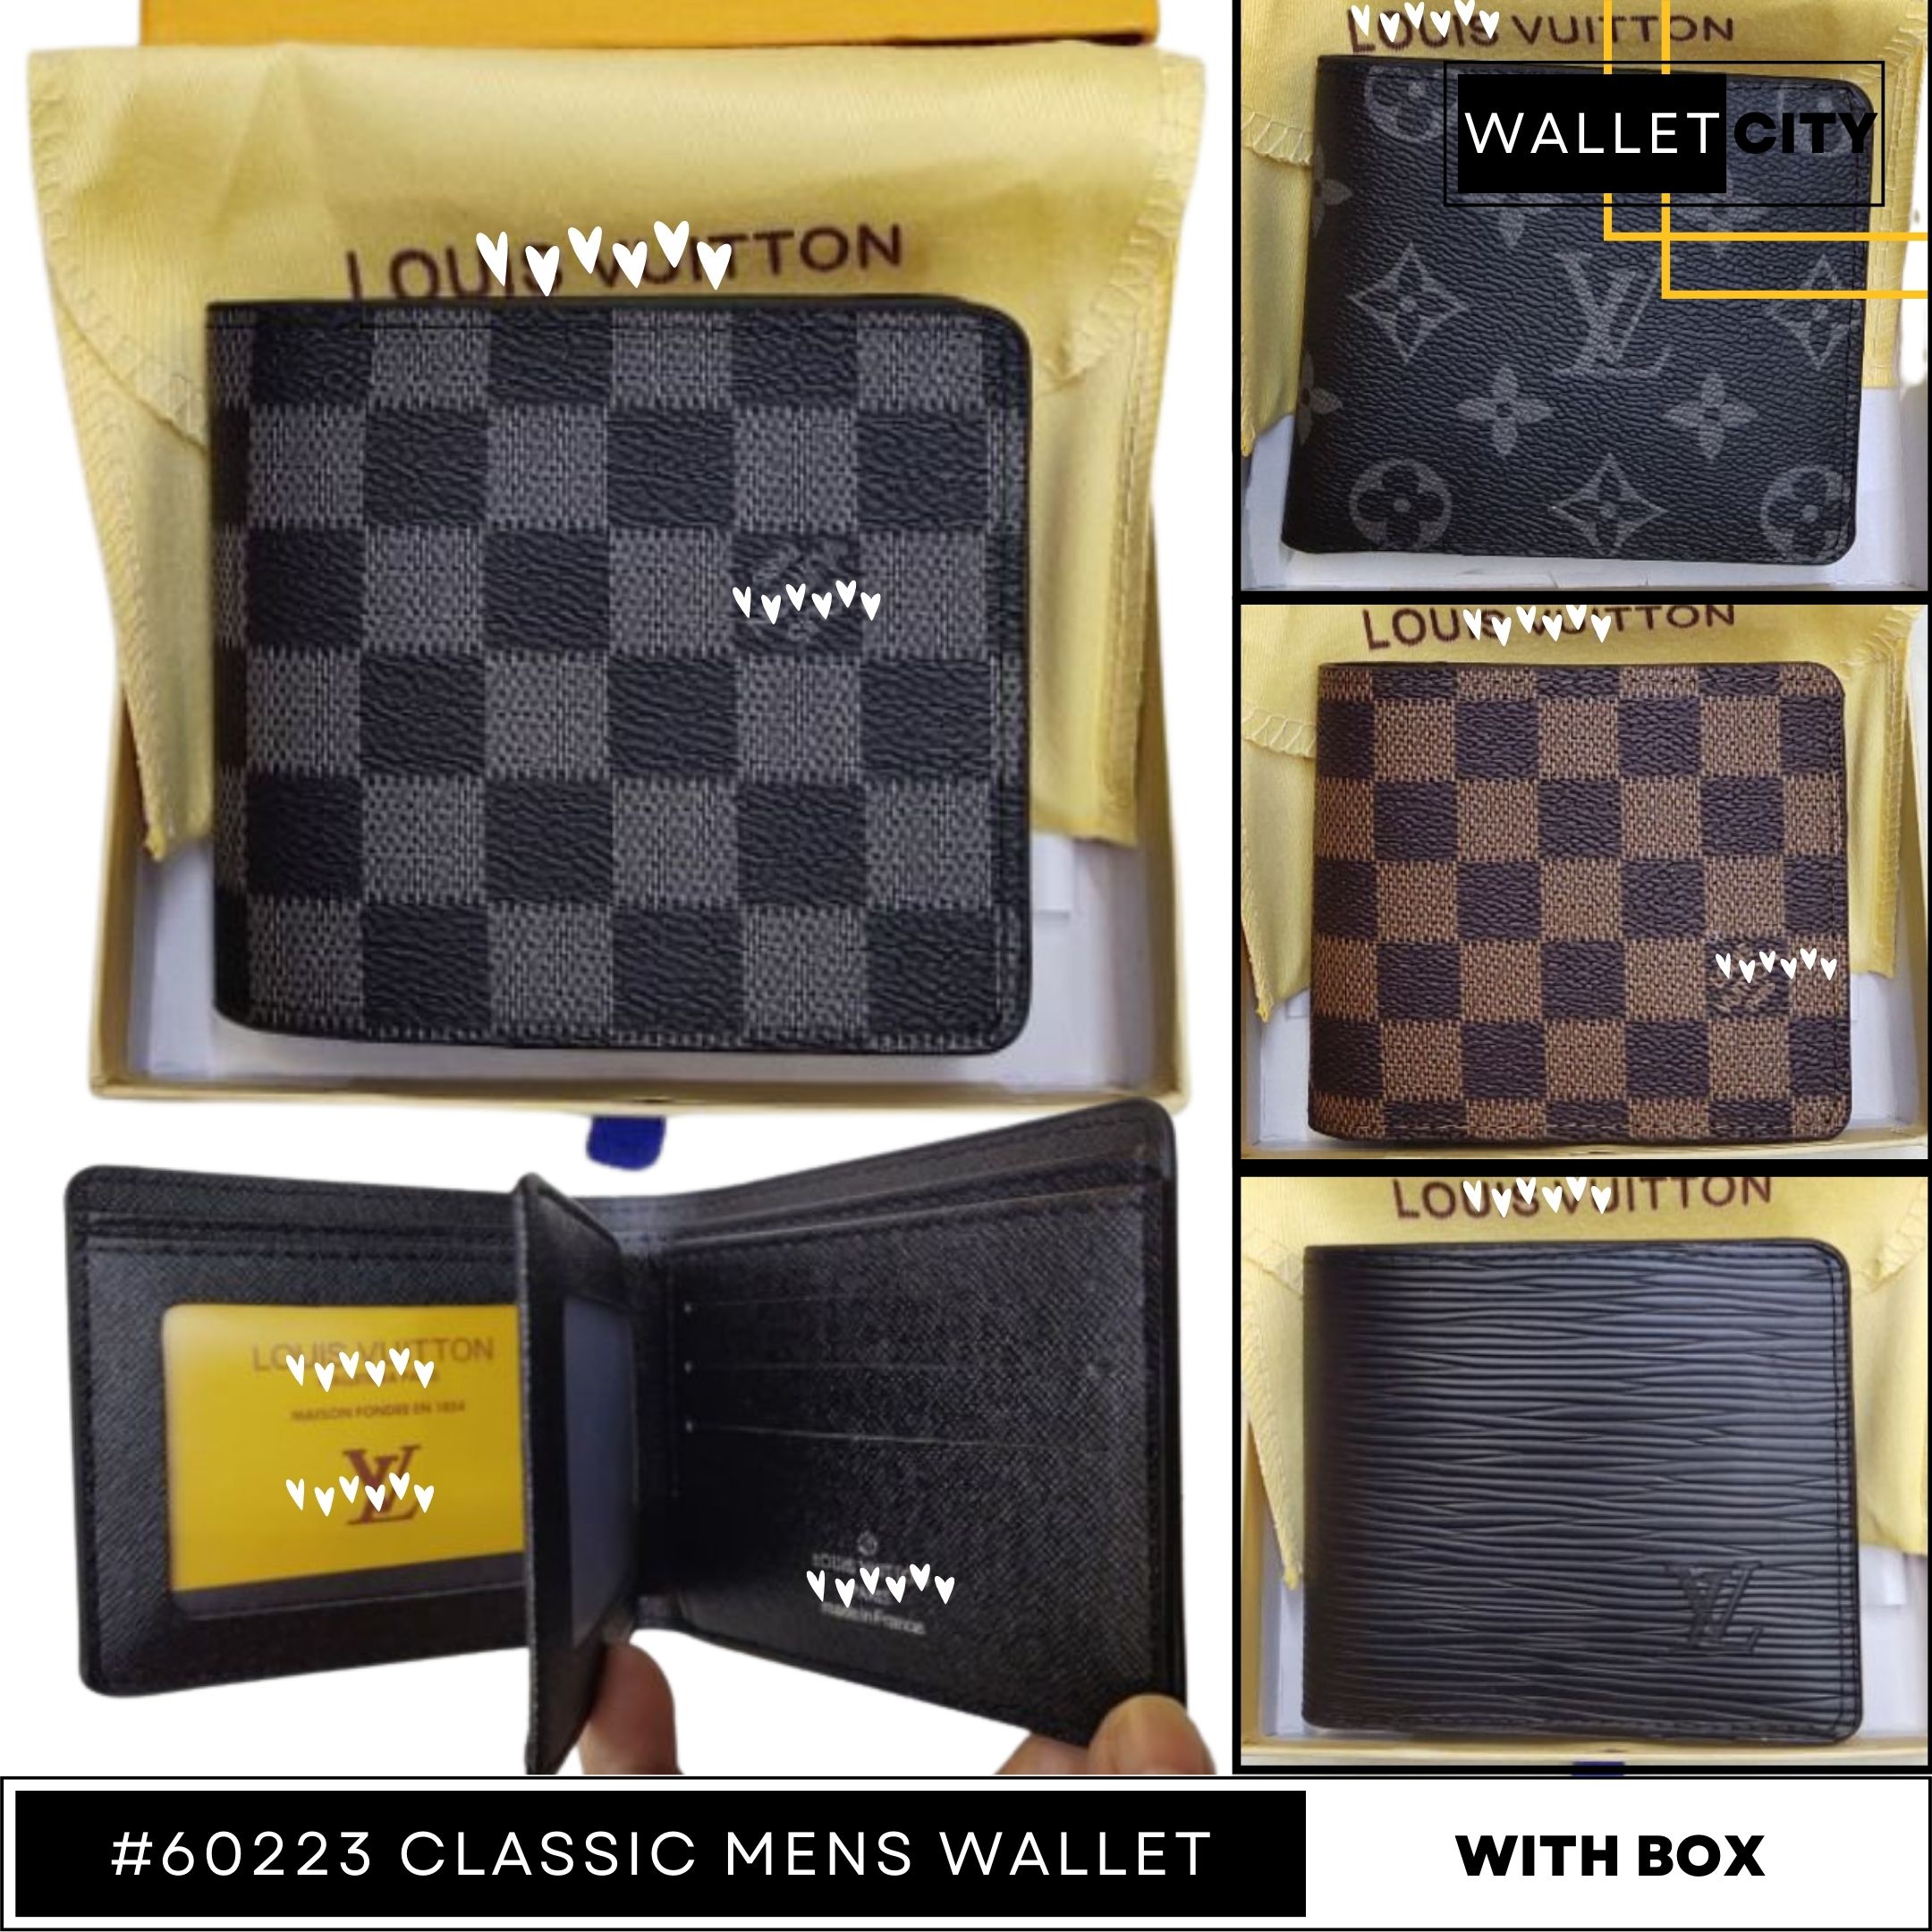 NO. 60223  Lv wallet, Wallet, Trifold